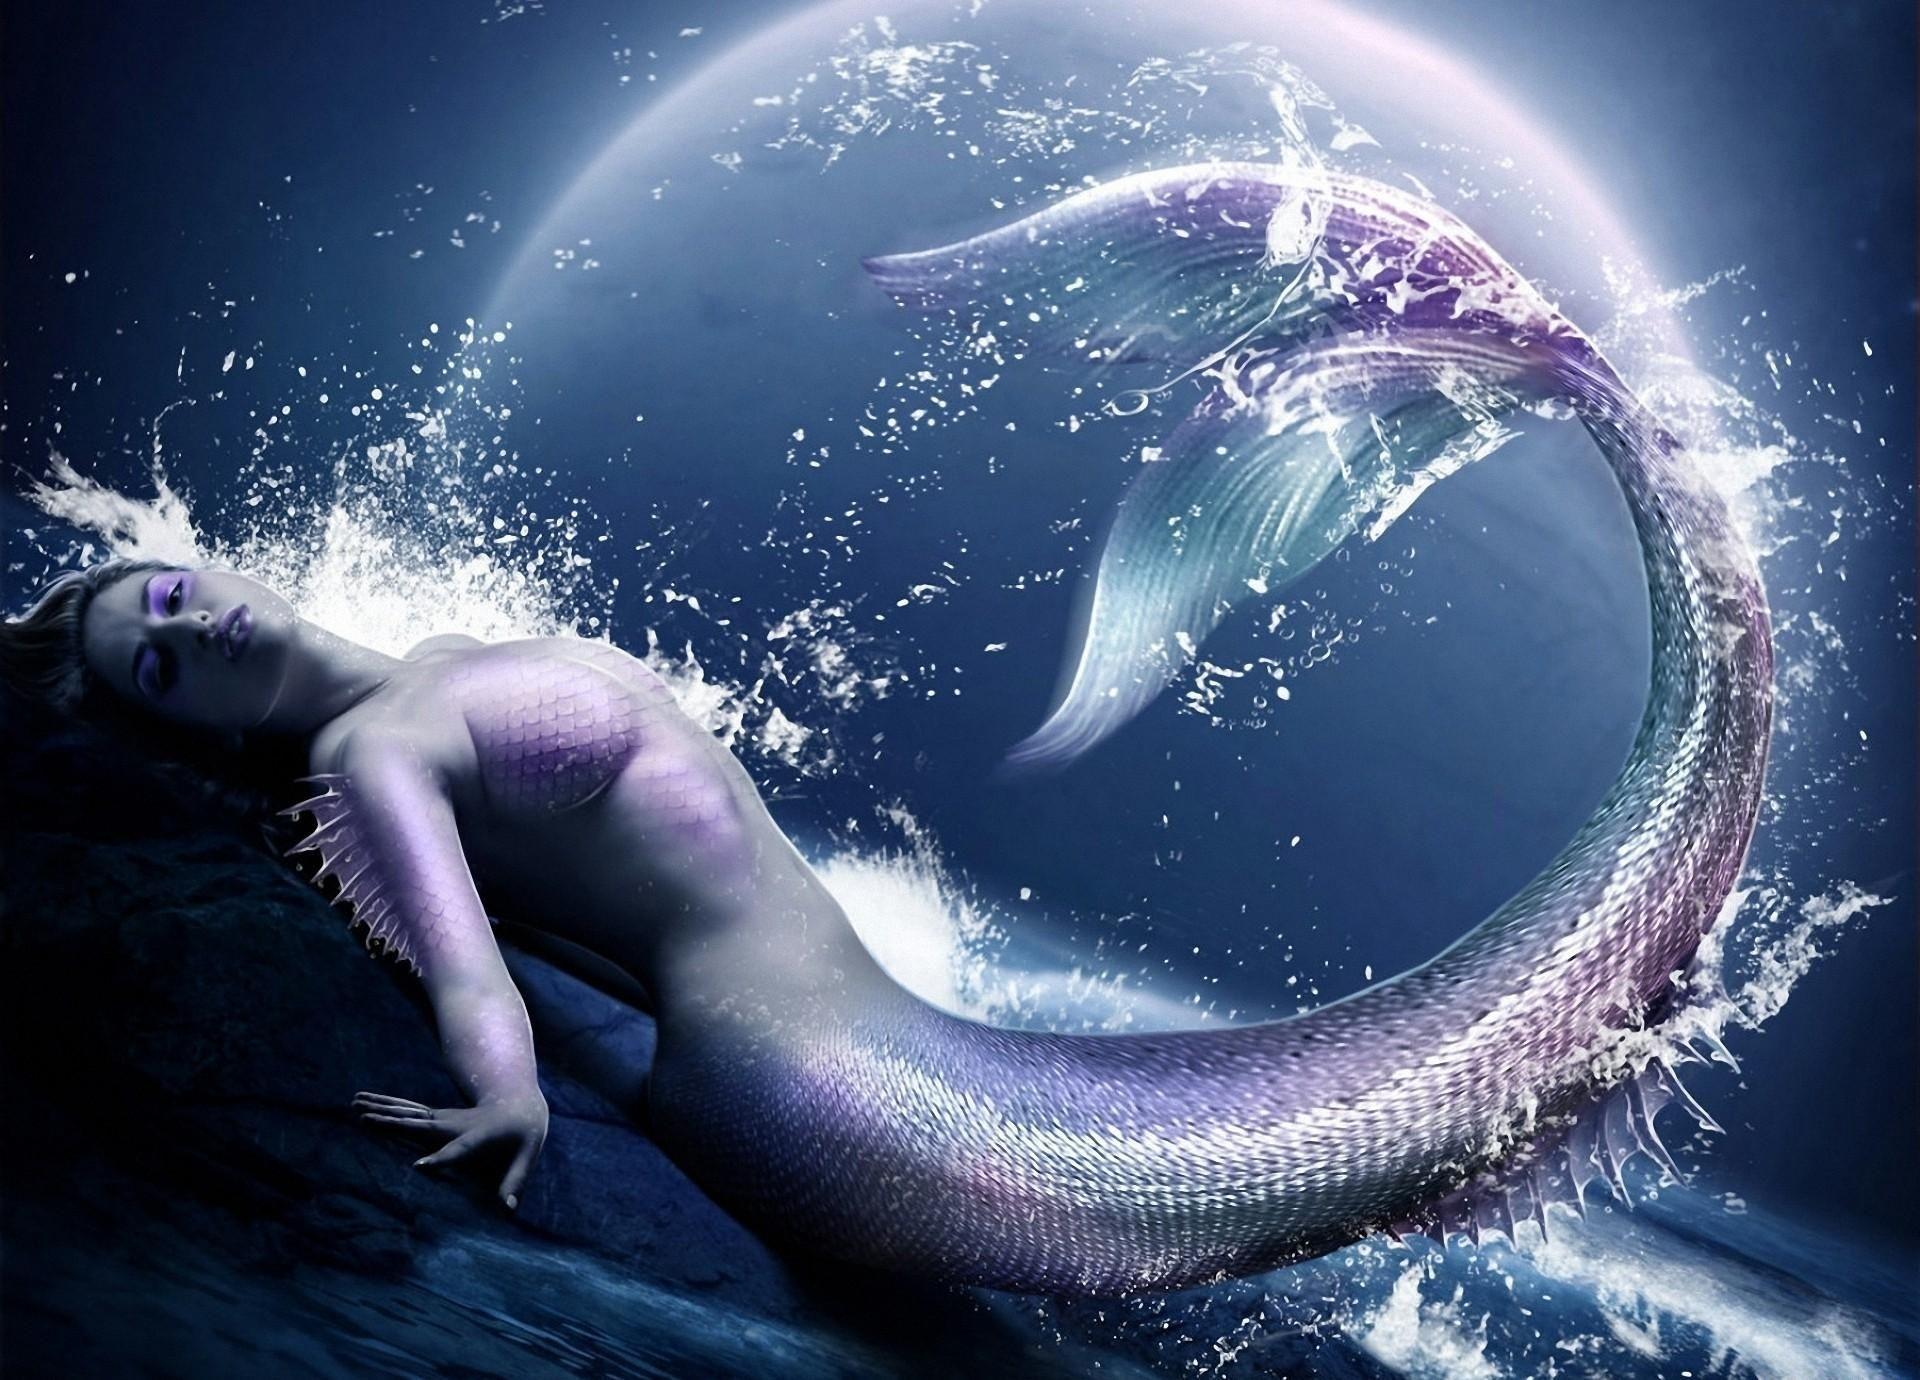 Image For > Mermaid Backgrounds